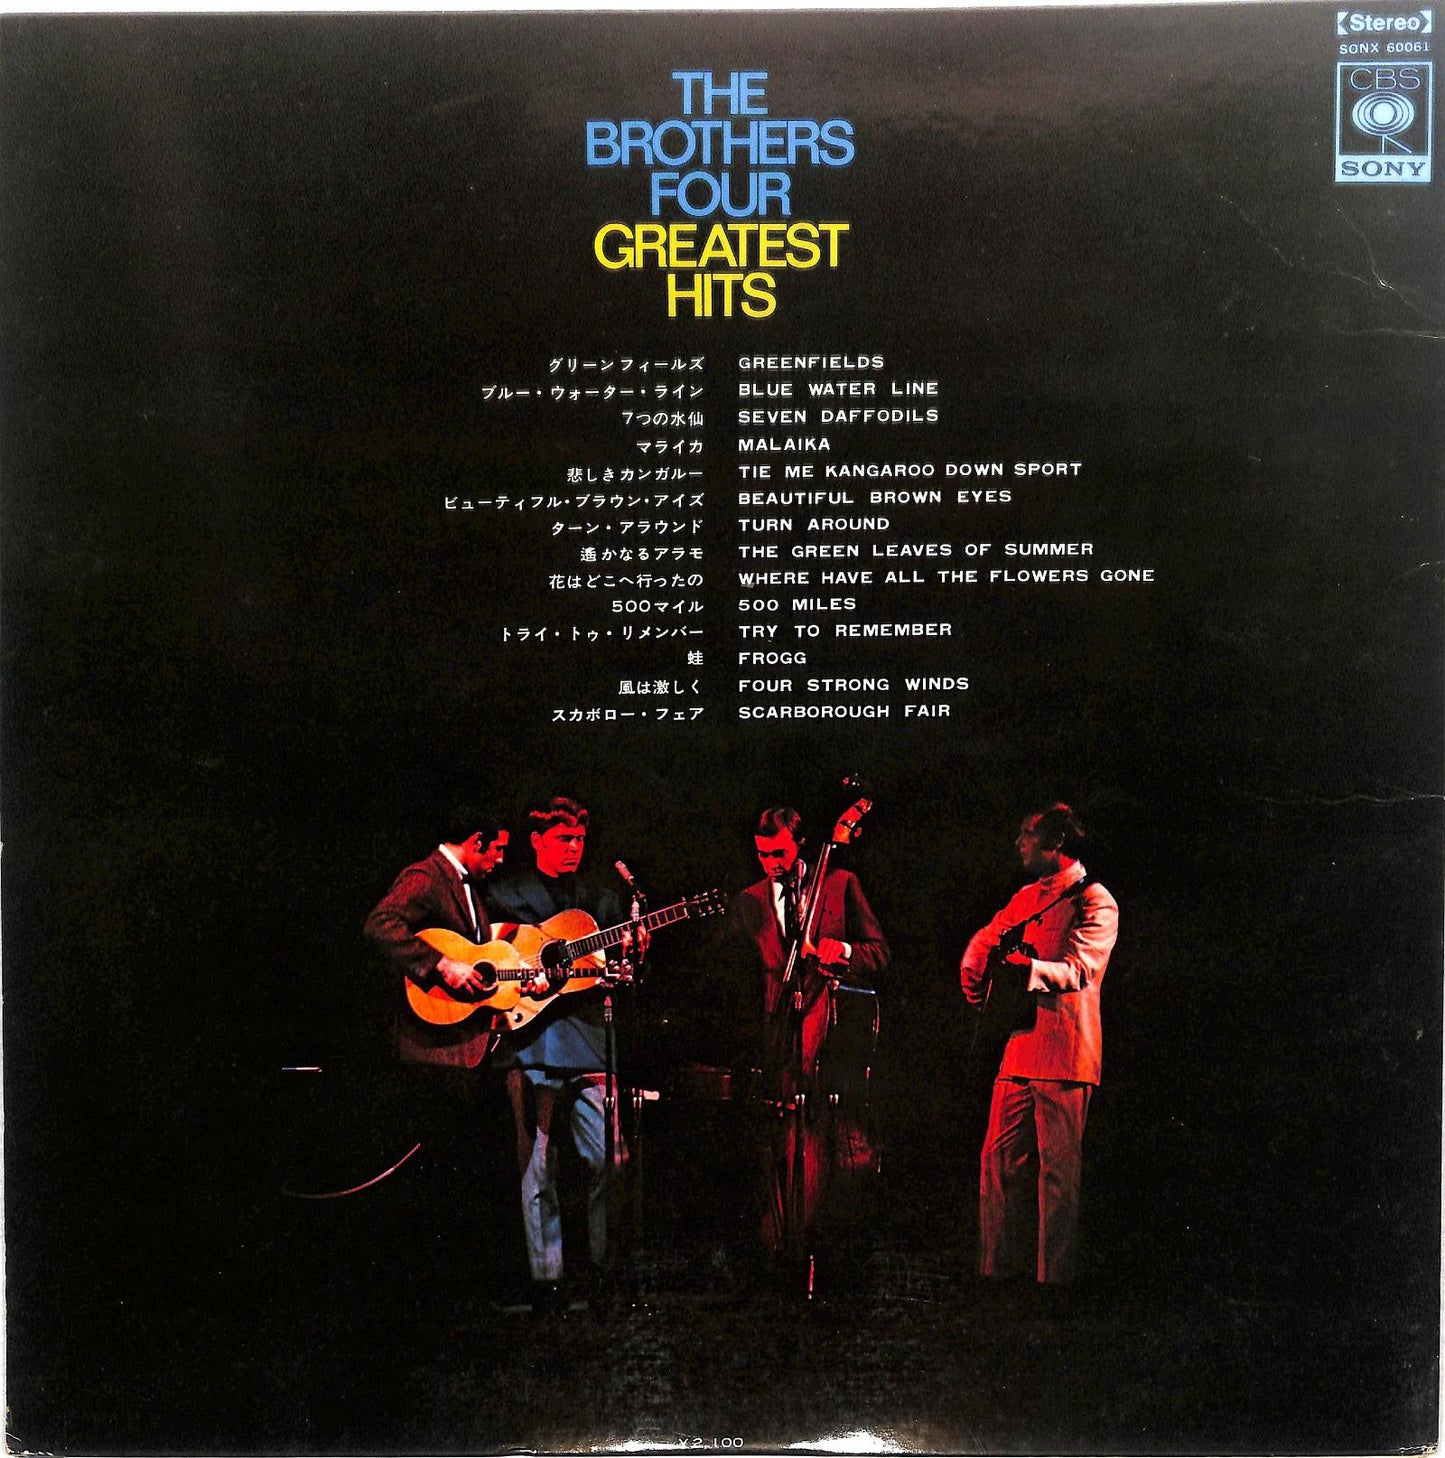 THE BROTHERS FOUR - The Brothers Four Greatest Hits